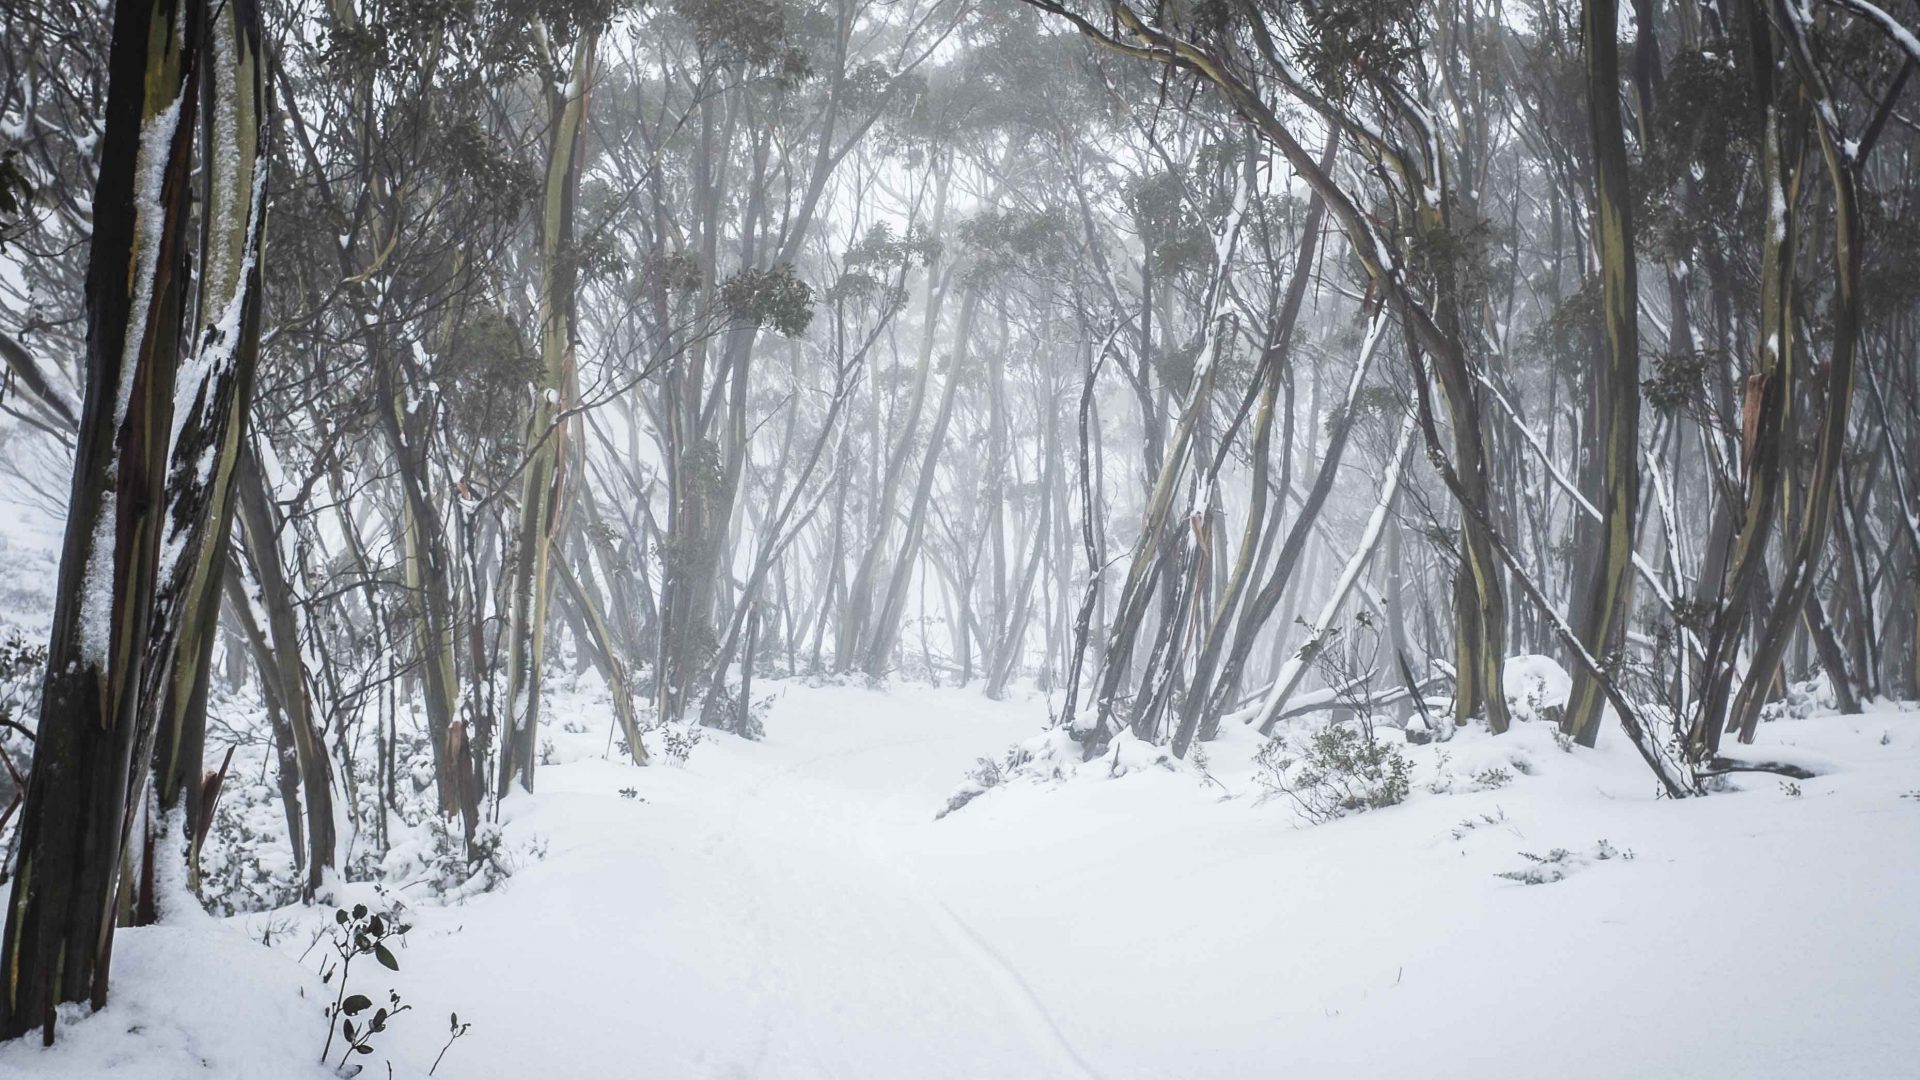 The snow-covered surrounds of Mount Baw Baw, Victoria, Australia.